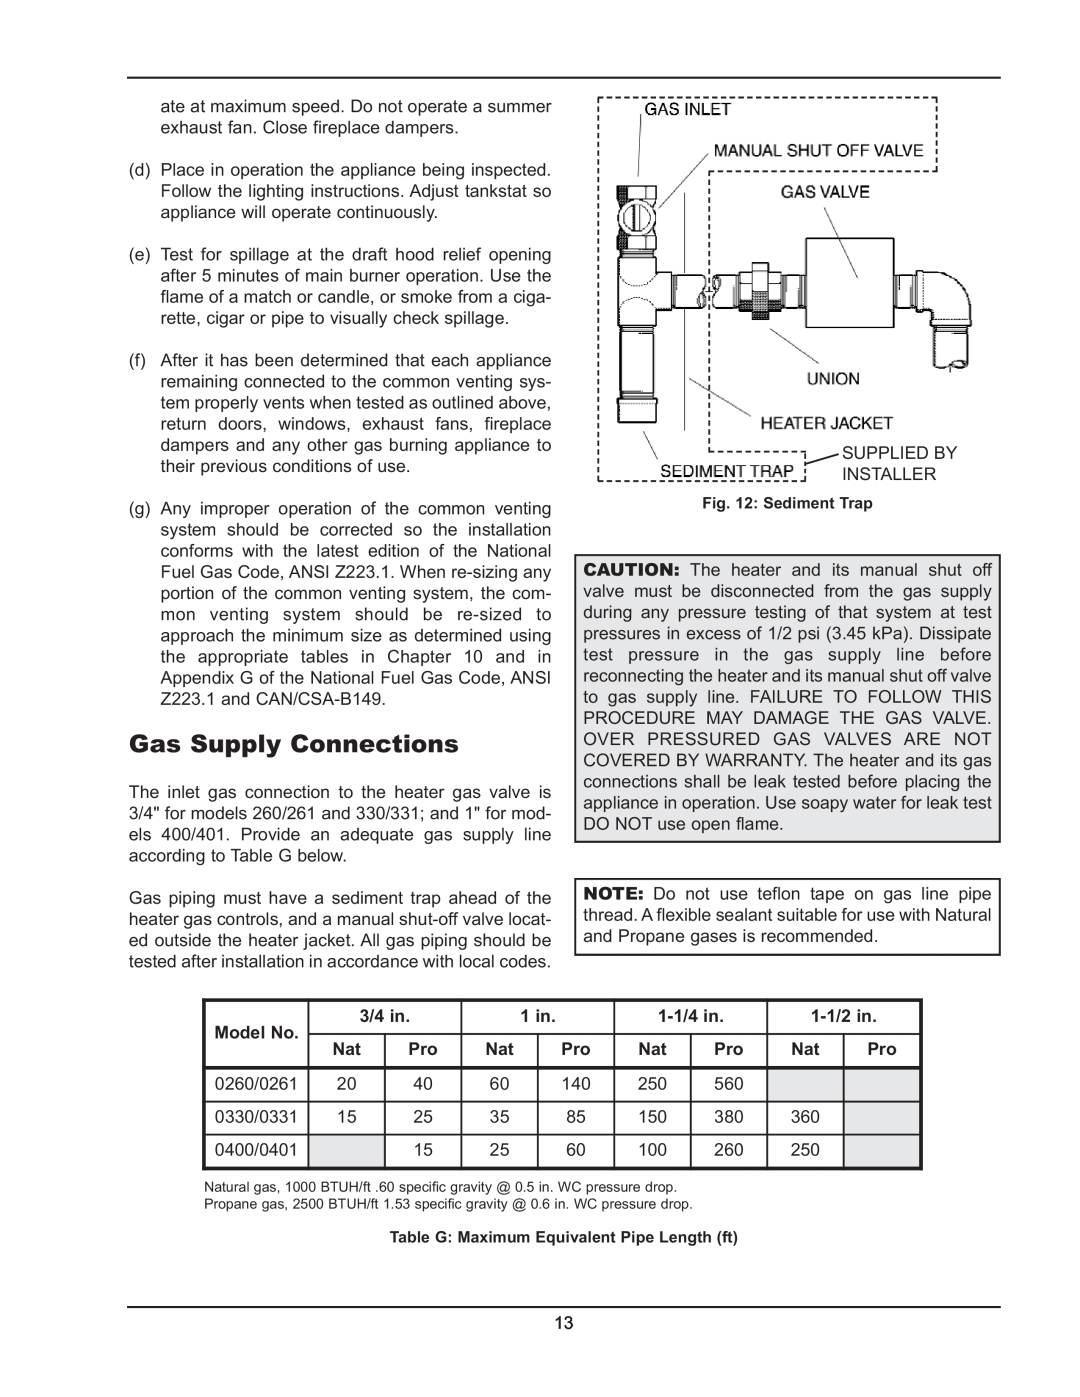 Raypak 2600401 operating instructions Gas Supply Connections, Model No, 3/4 in, 1 in, 1-1/4in, 1-1/2in 